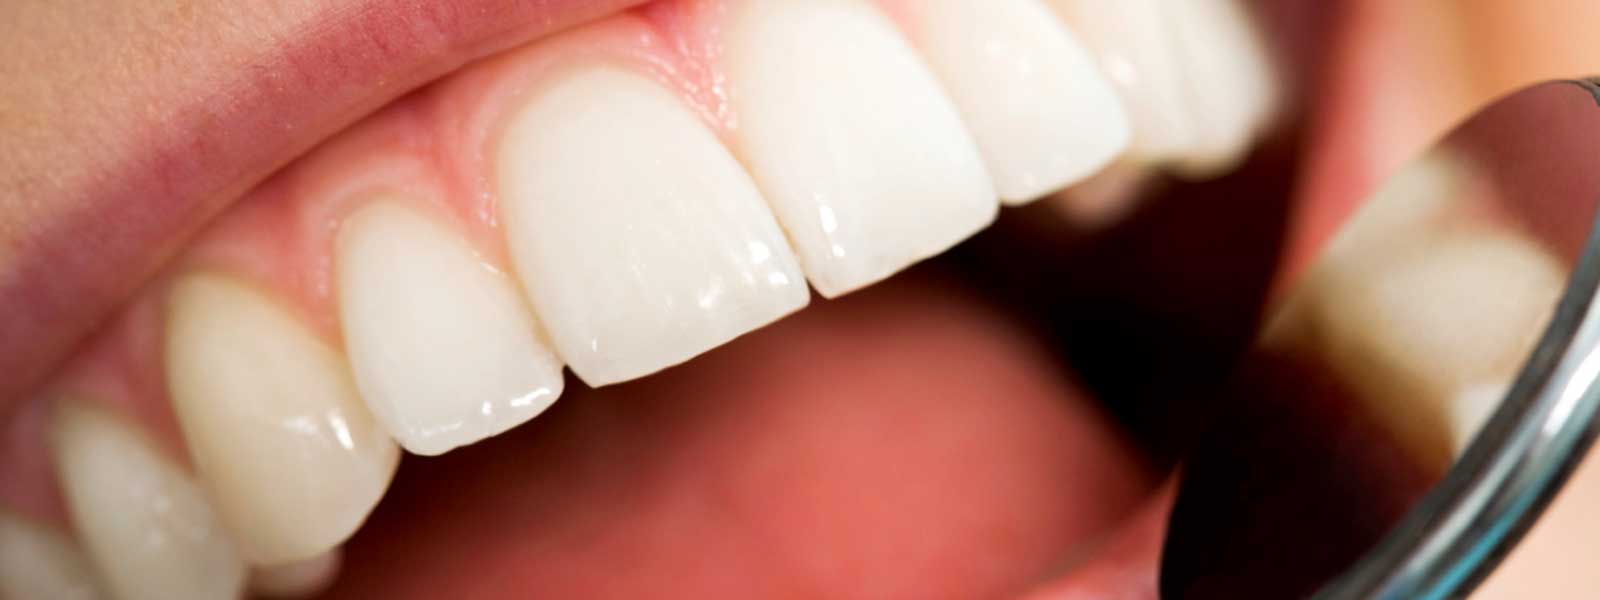 Cosmetic dentistry options improve appearance and enhance your smile